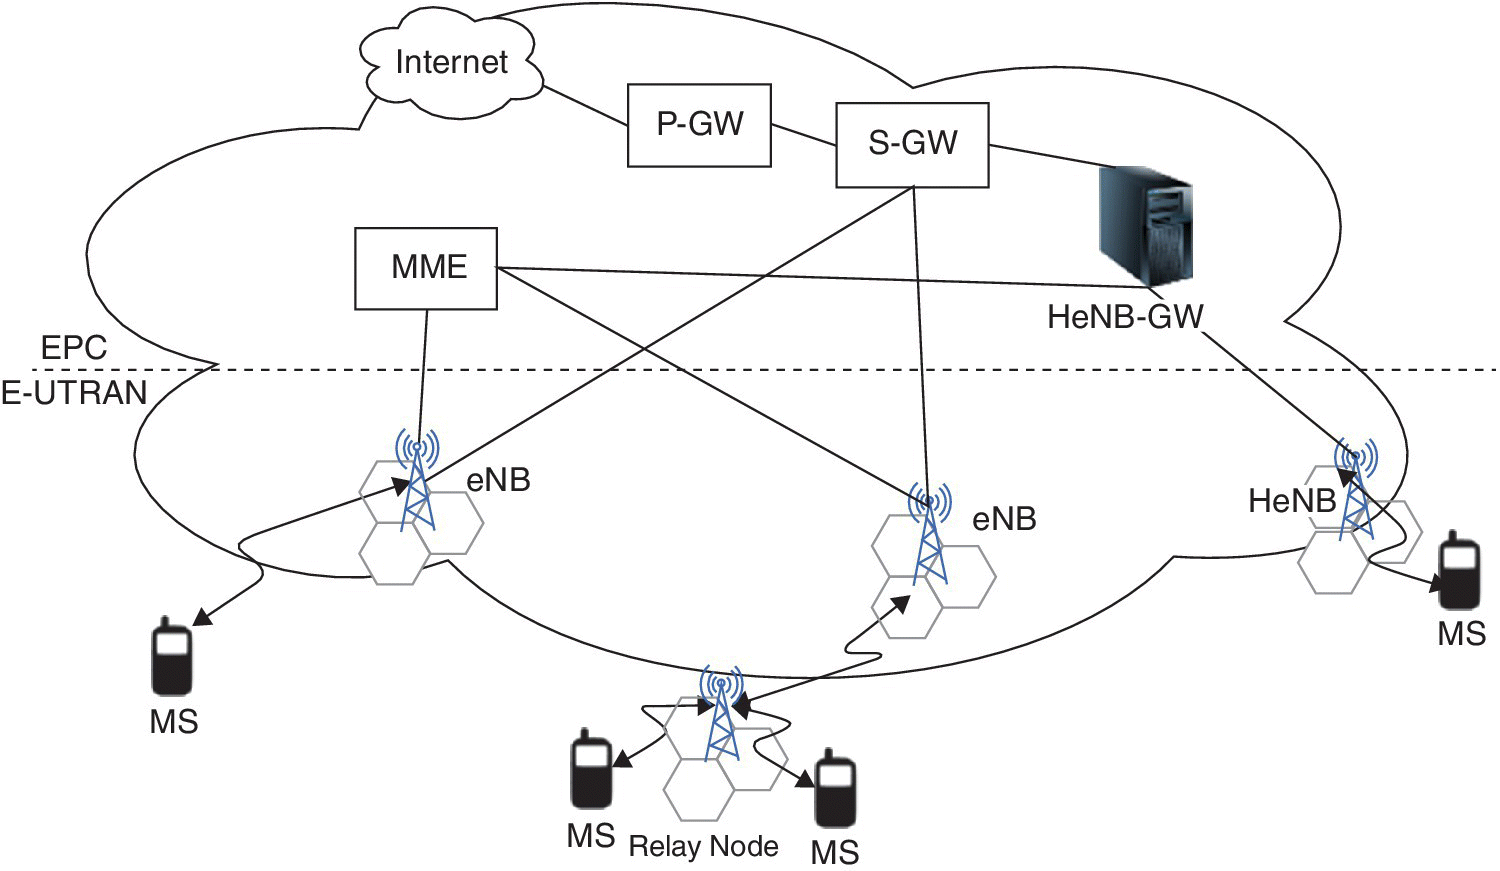 LTE‐advanced E‐UTRAN network architecture displaying boxes labeled internet, P-GW, S-GW, and MME connected to a CPU icon for HeNB-GW, with 3-hexagons connected to cellphone icons labeled MS.